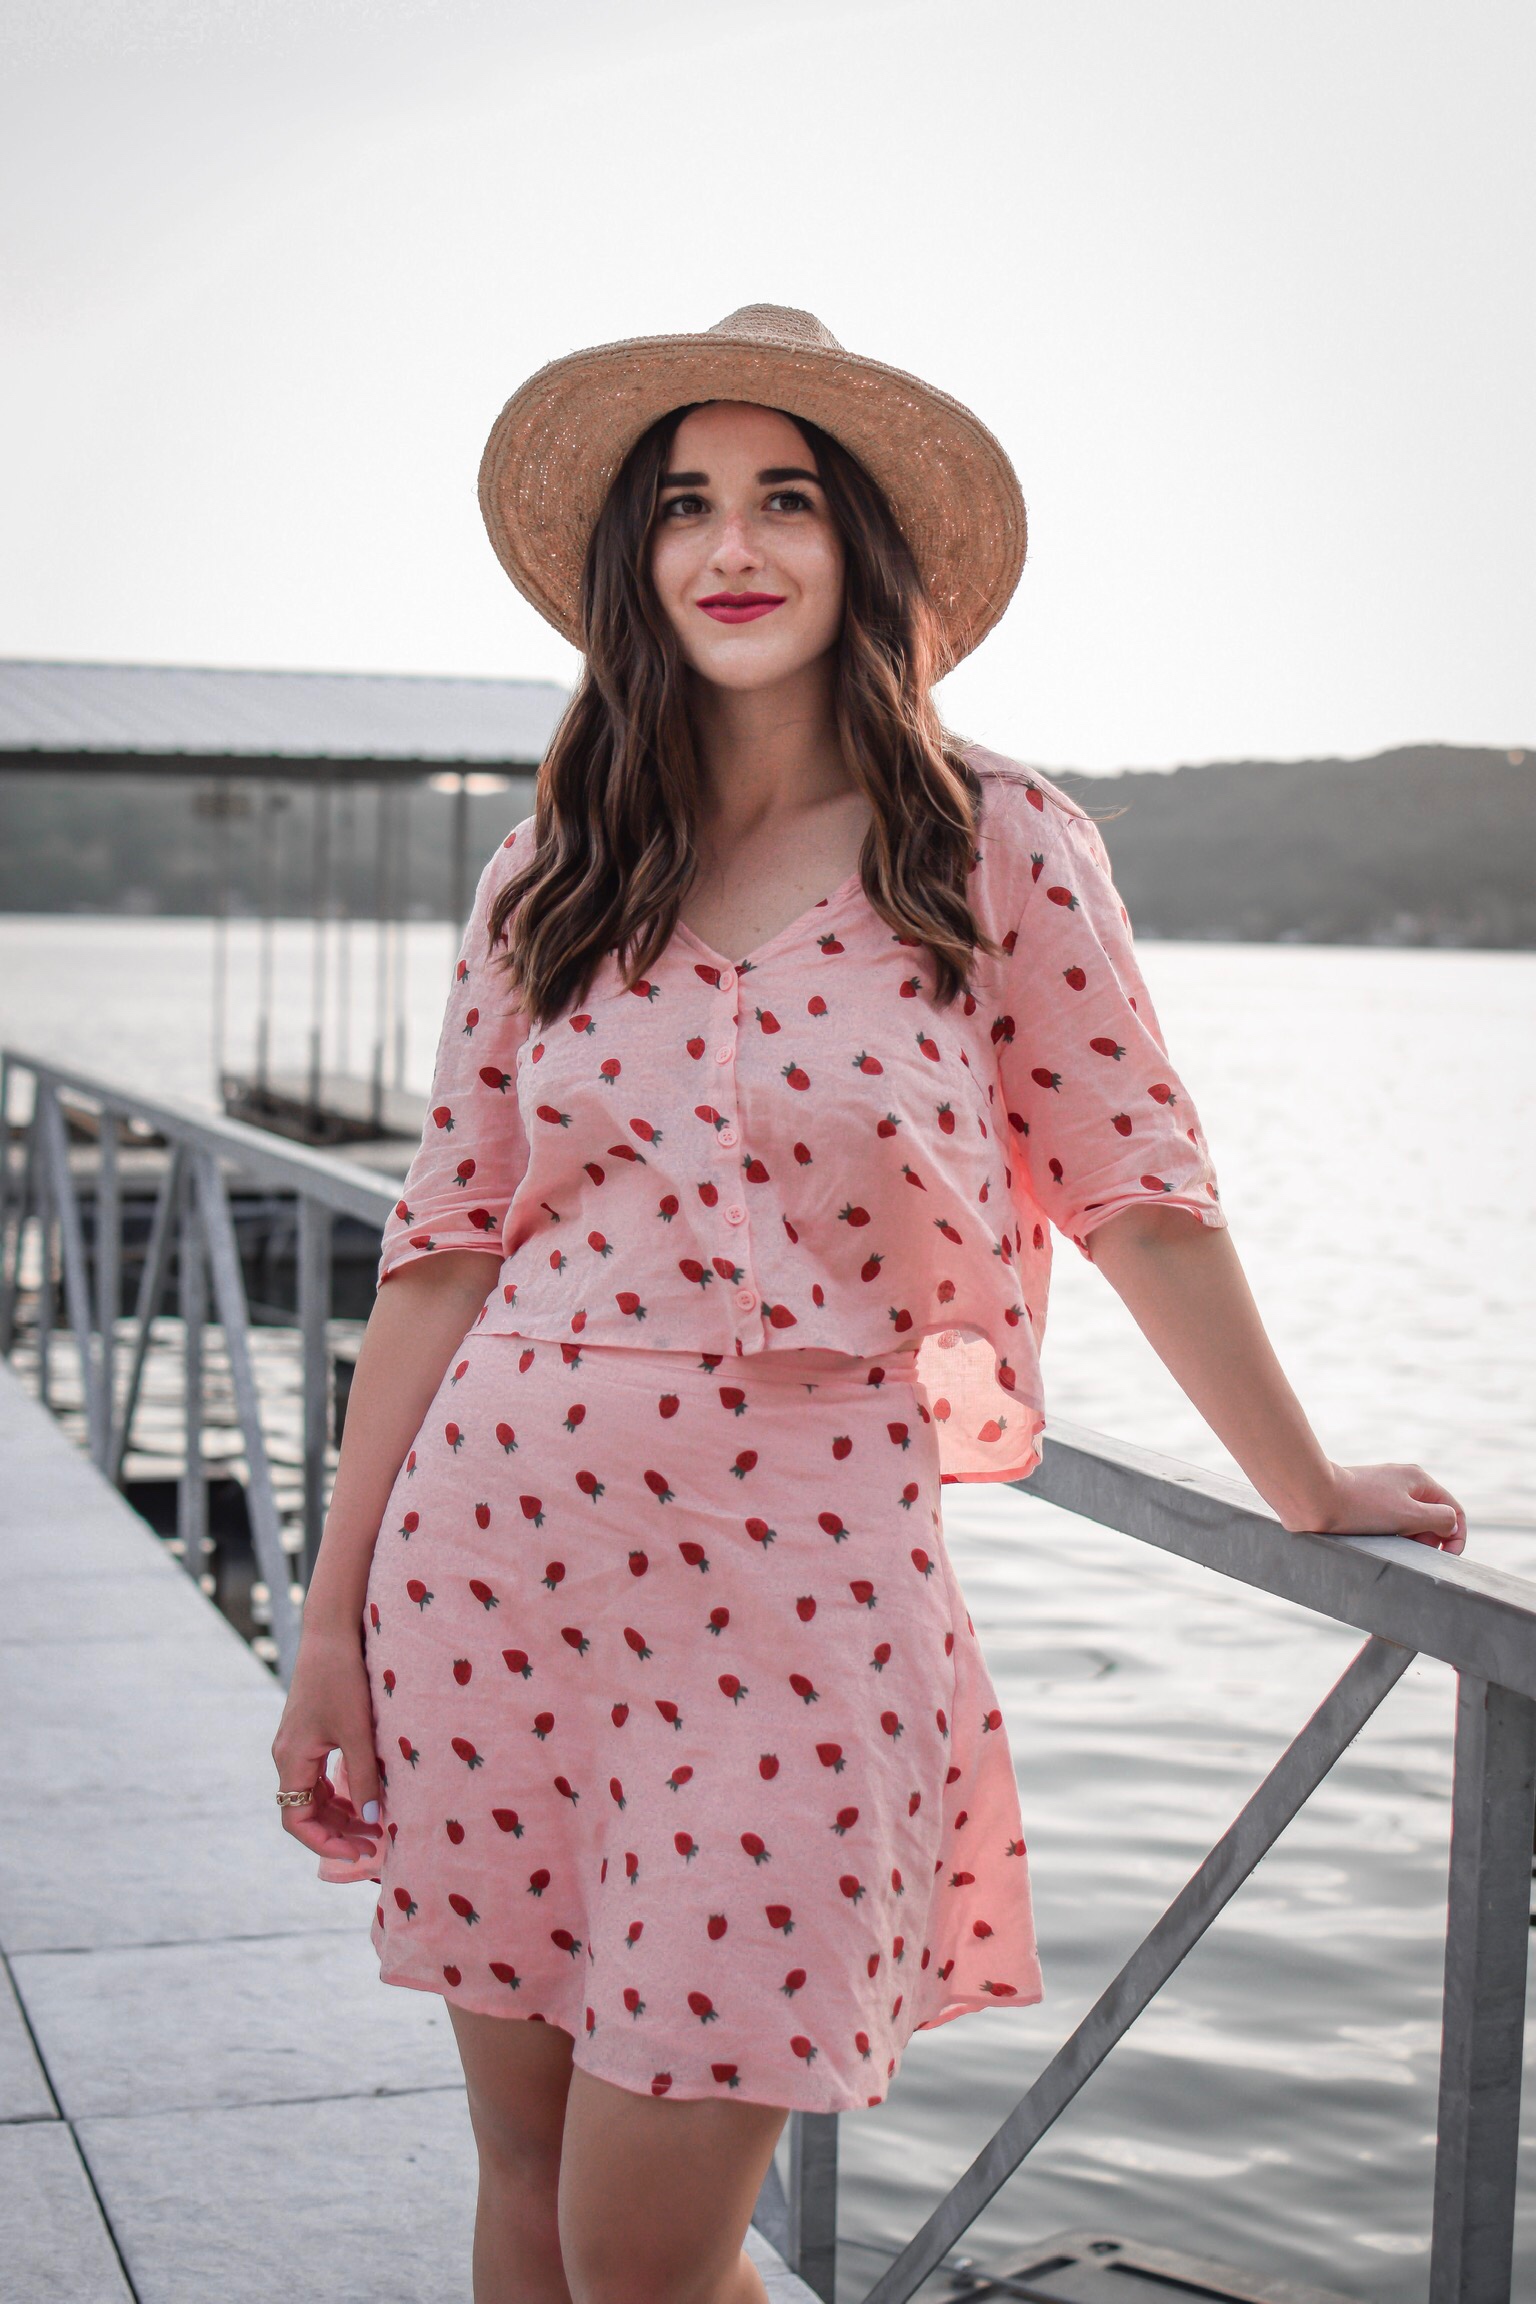 Strawberry Set Walmart Fashion Esther Santer Fashion Blog NYC Street Style Blogger Outfit OOTD Trendy Shopping Girl What How To Wear Affordable Fruit Trend Straw Hat Vacation Lake of the Ozarks White Mules Sandals Nature Travel Shopping Two Piece Set.JPG